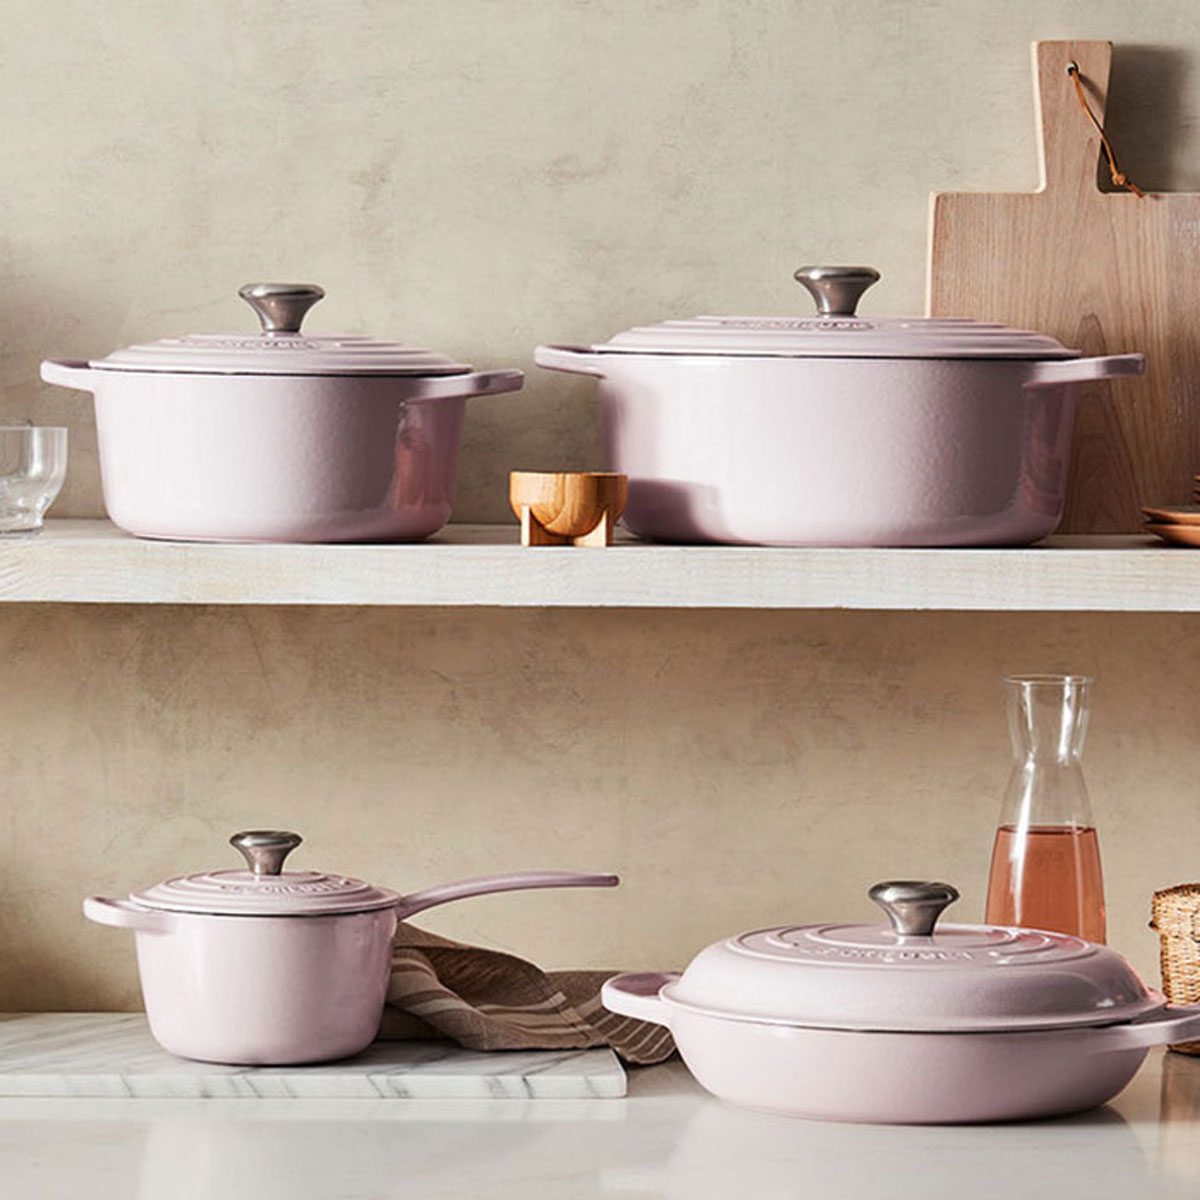 Le Creuset Reveals New Neutral Color in Their Iconic Collection